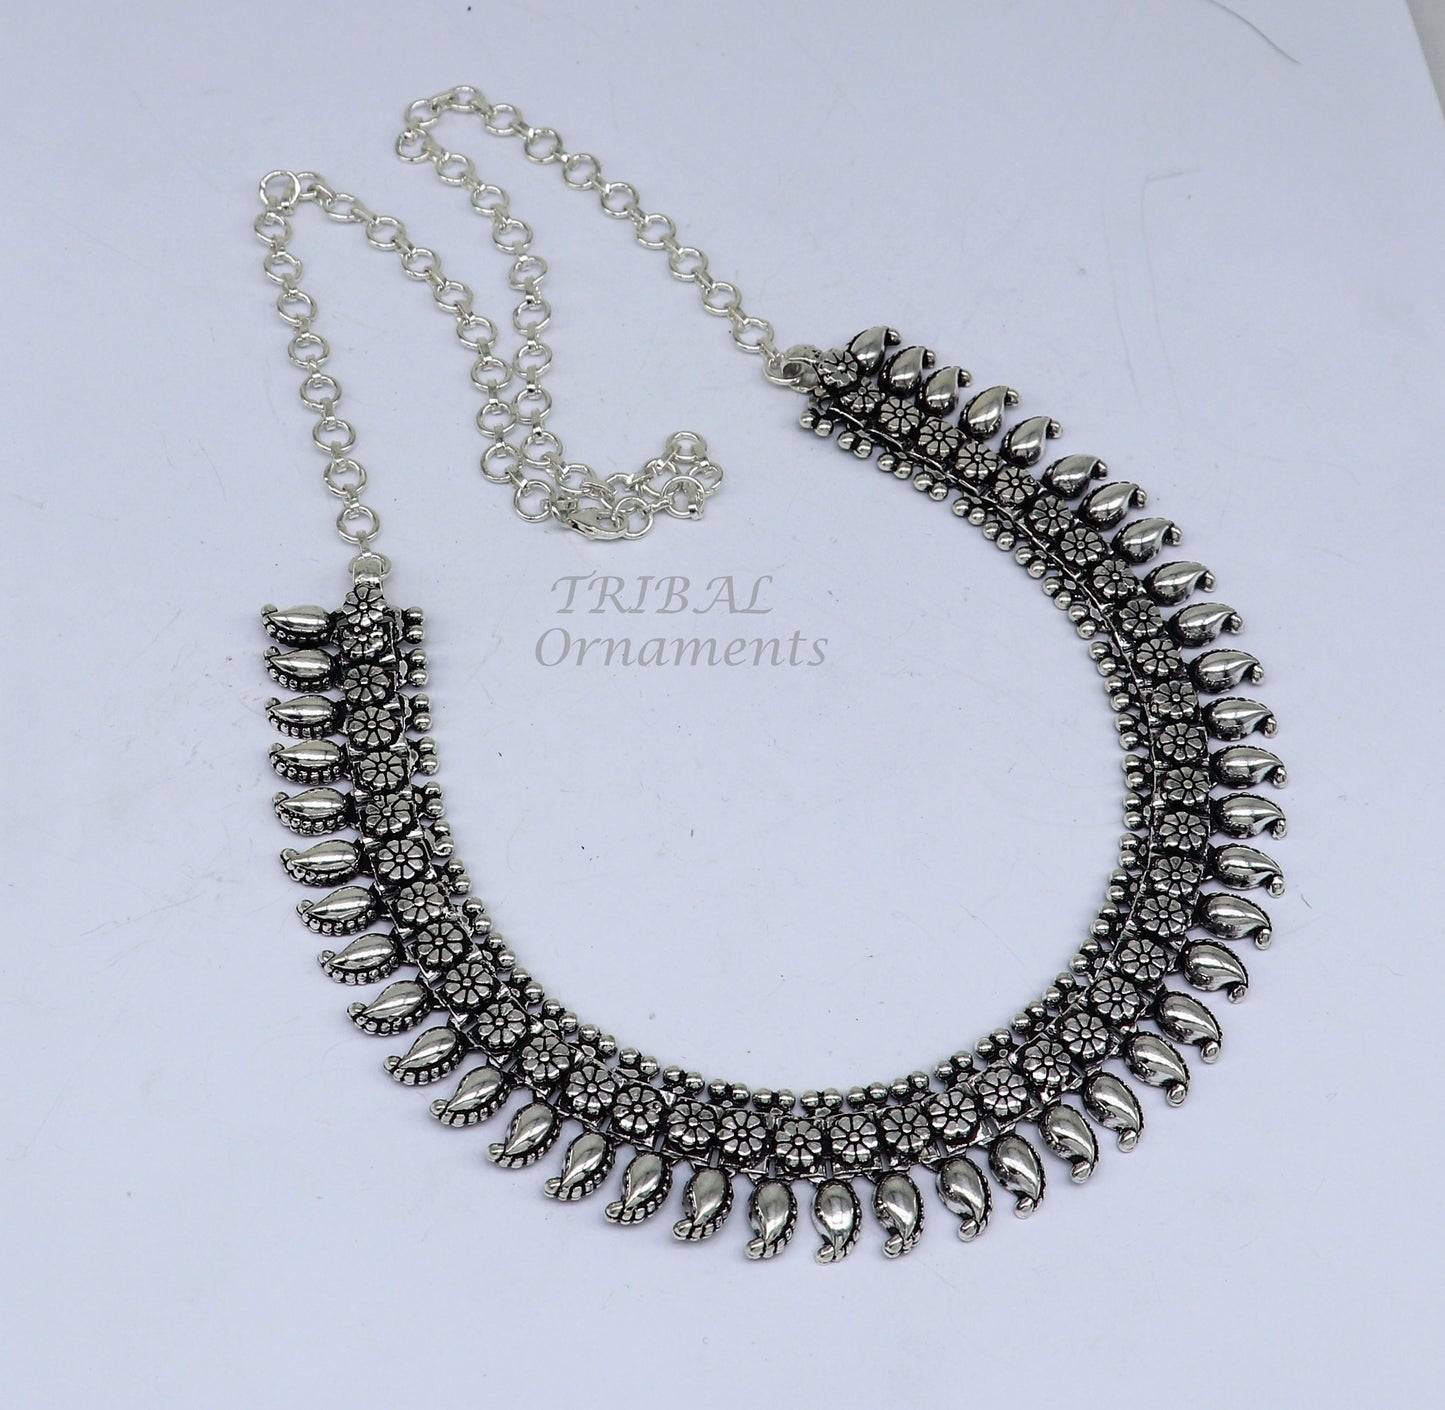 925 sterling silver handcrafted vintage design ethnic charm necklace excellent gifting tribal brides belly dance jewelry india set564 - TRIBAL ORNAMENTS